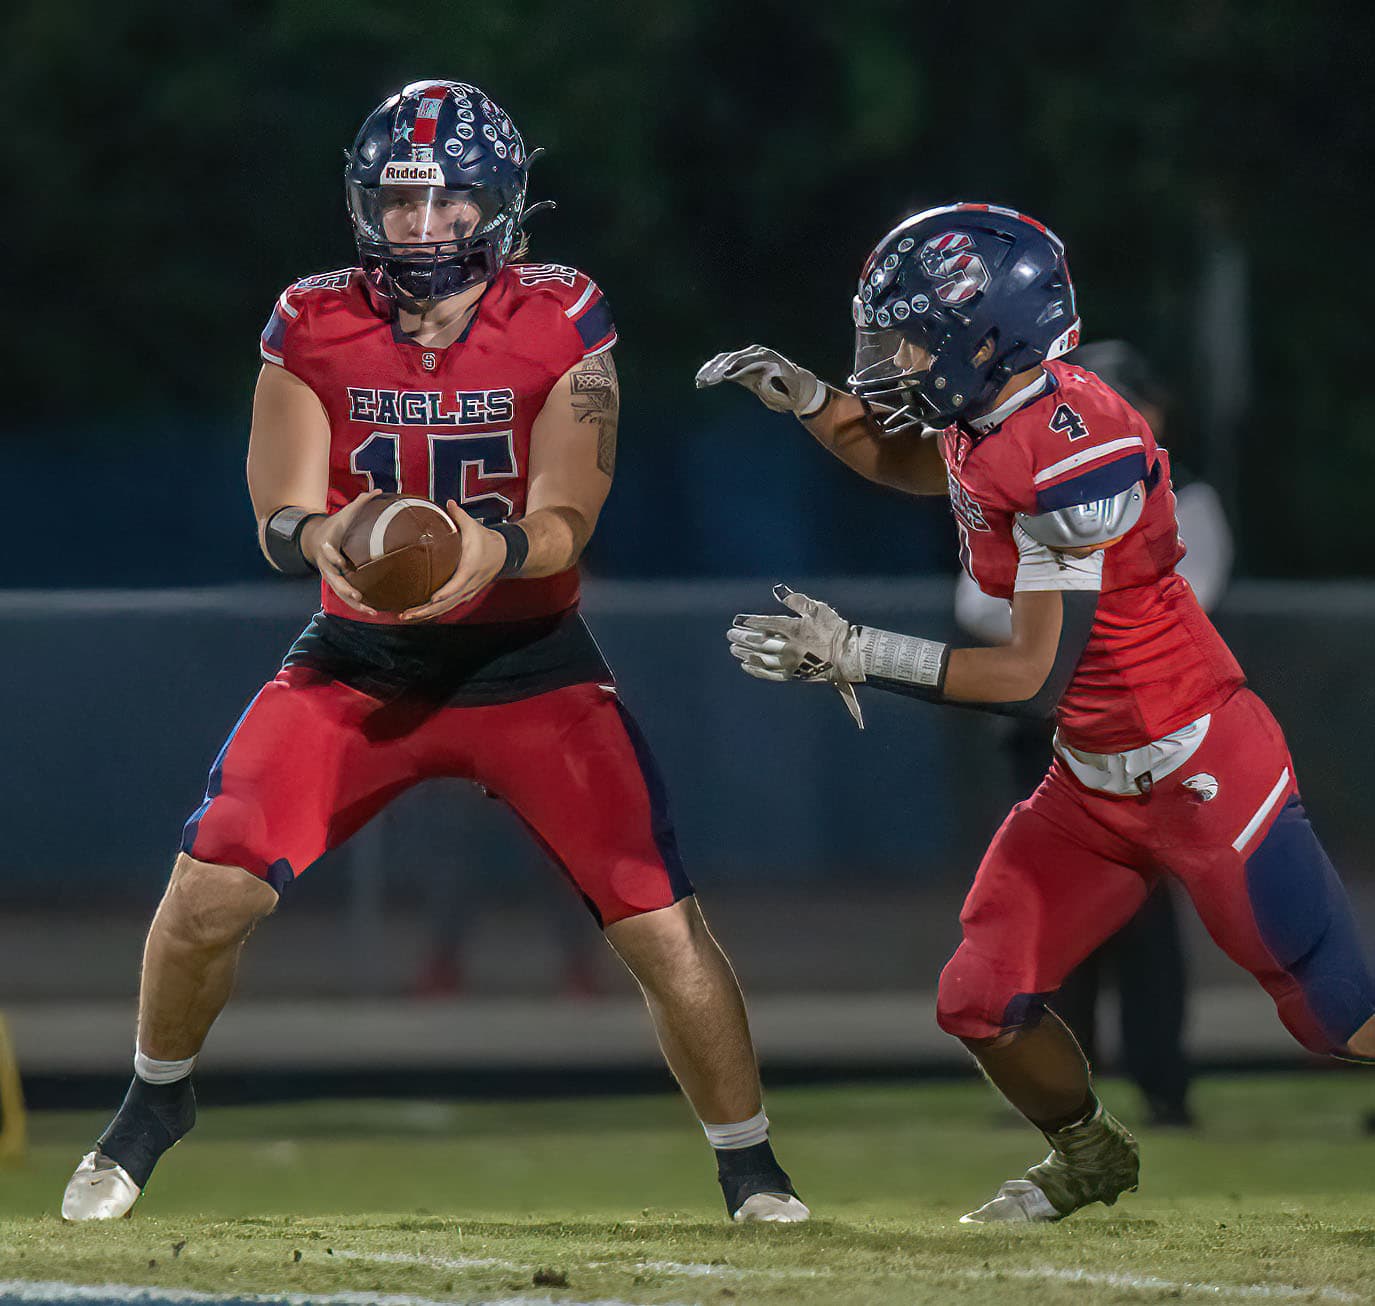 Springstead High QB, 15, Ayden Ferguson scans the defense before executing an option play in the playoff game versus Mitchell High. Photo by JOE DiCRISTOFALO